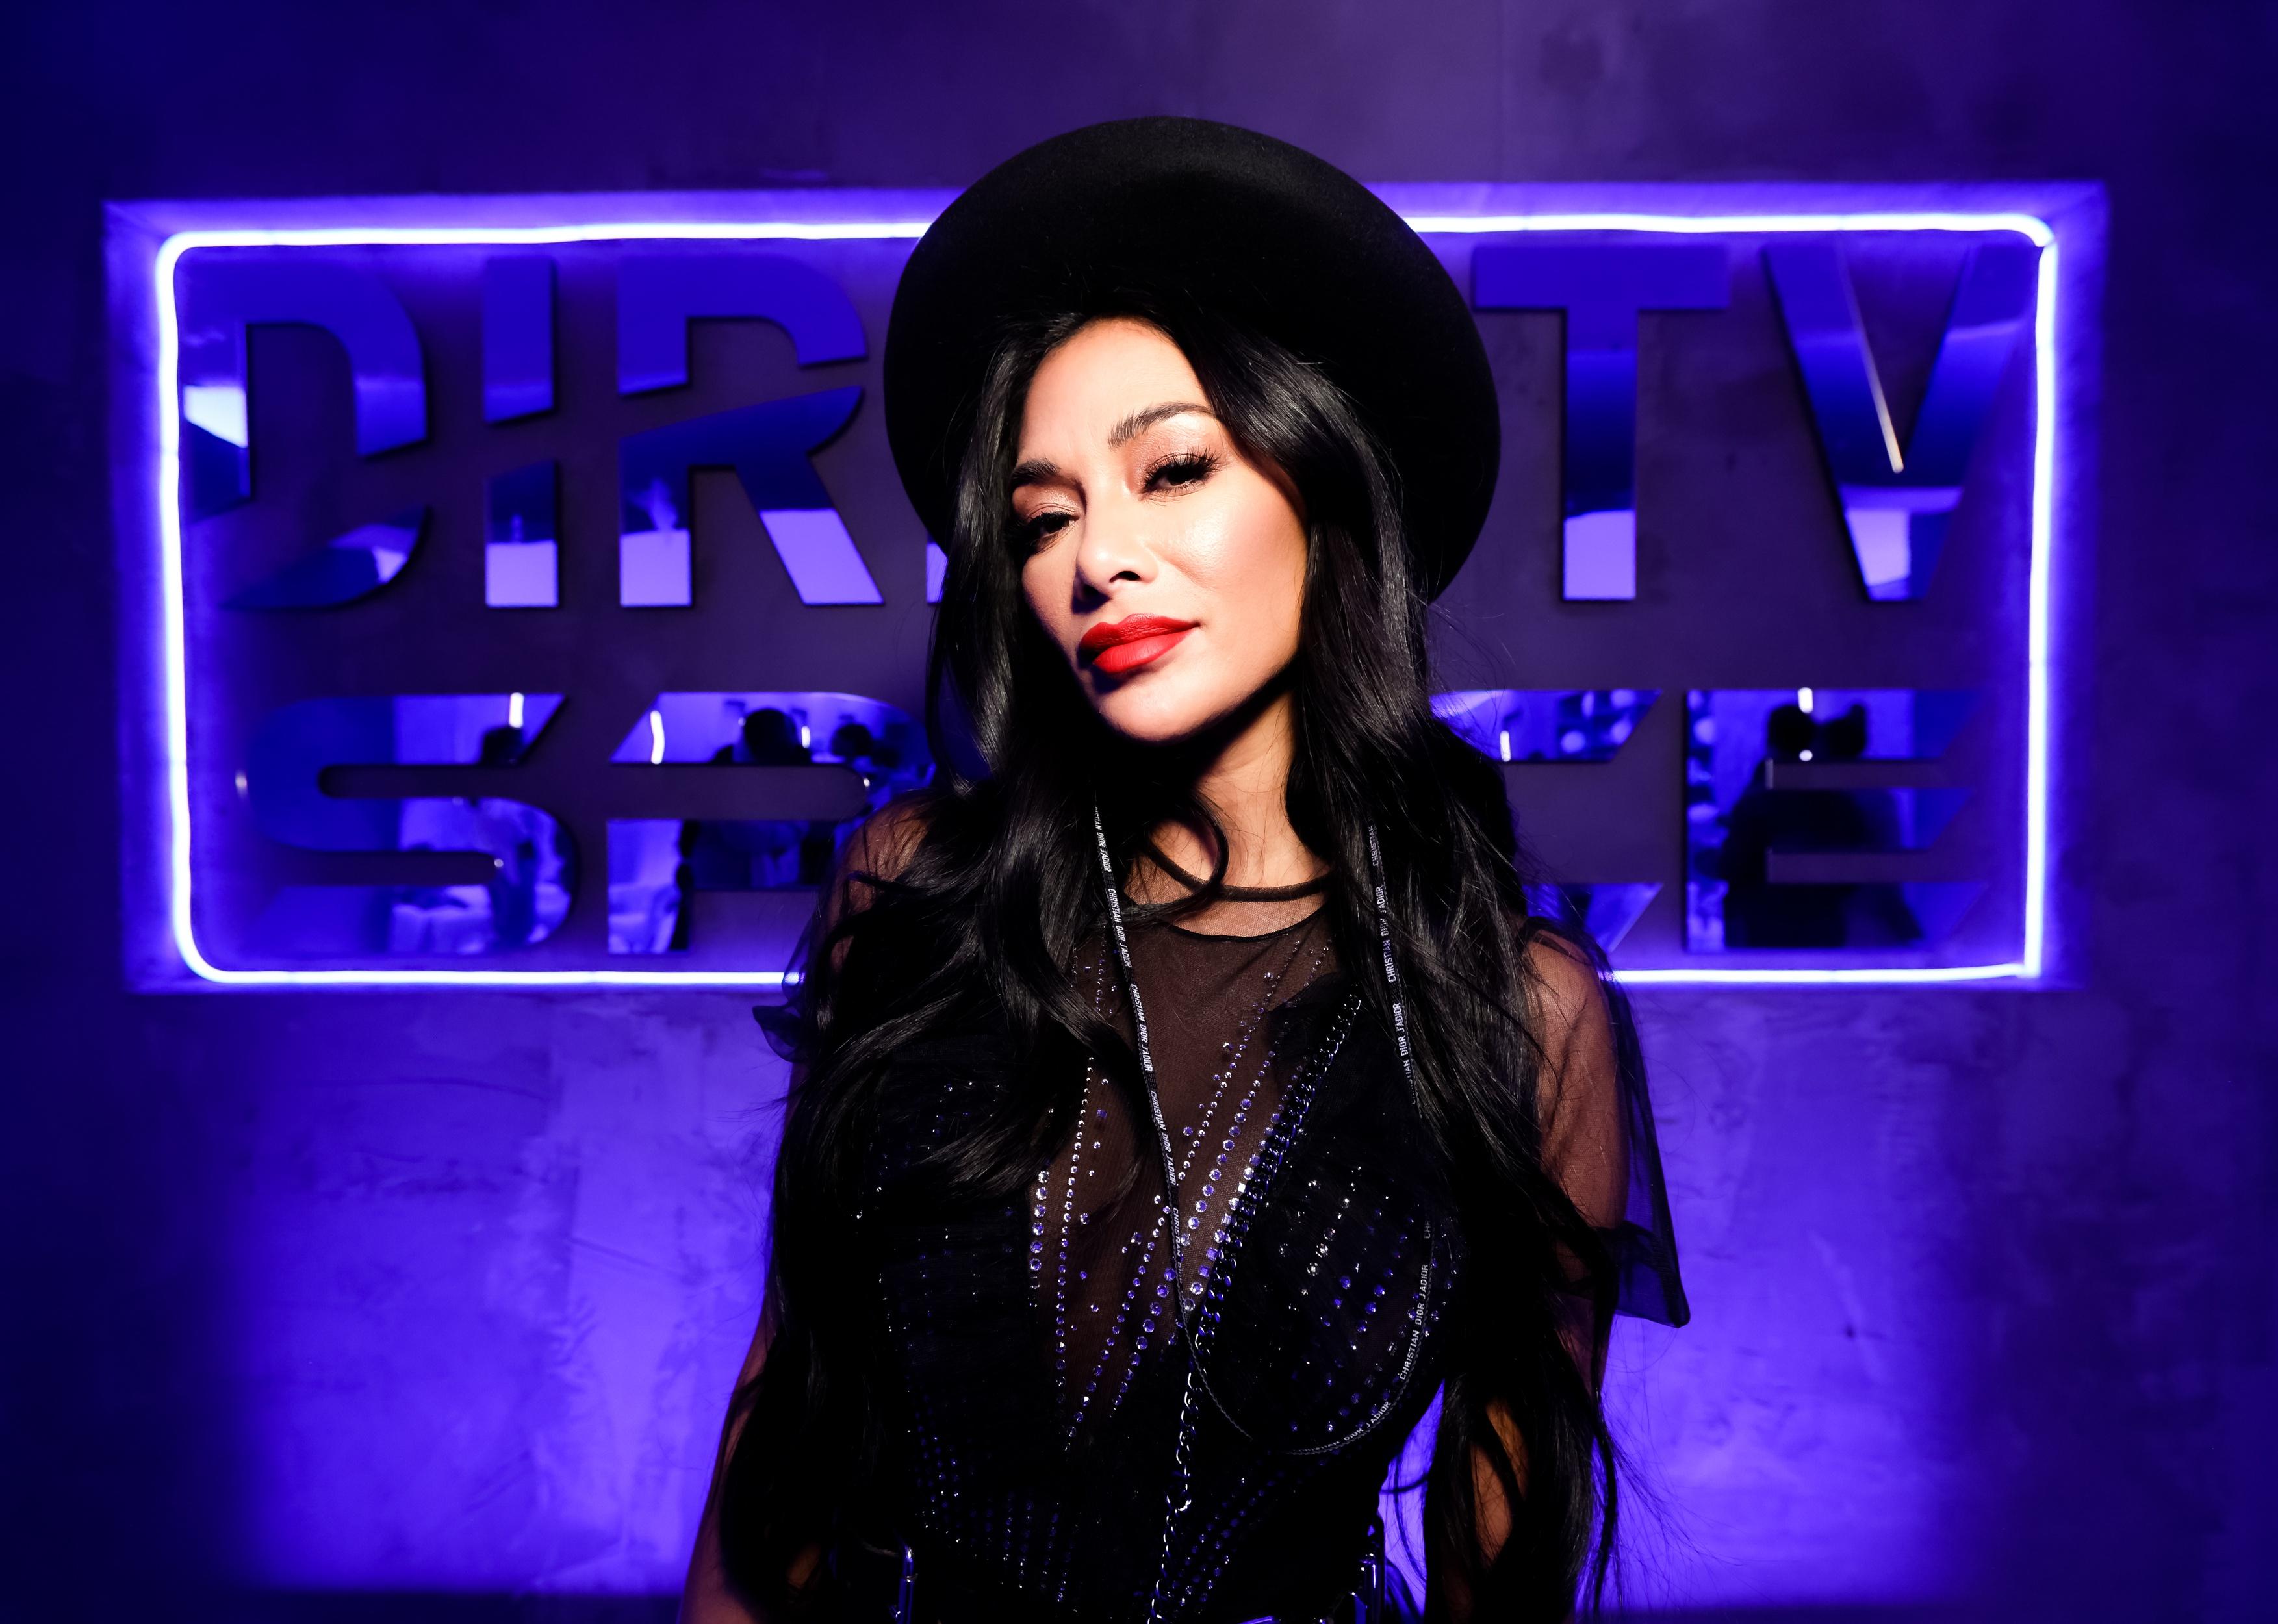 Nicole Scherzinger dressed in black with a black hat in front of a neon blue sign.